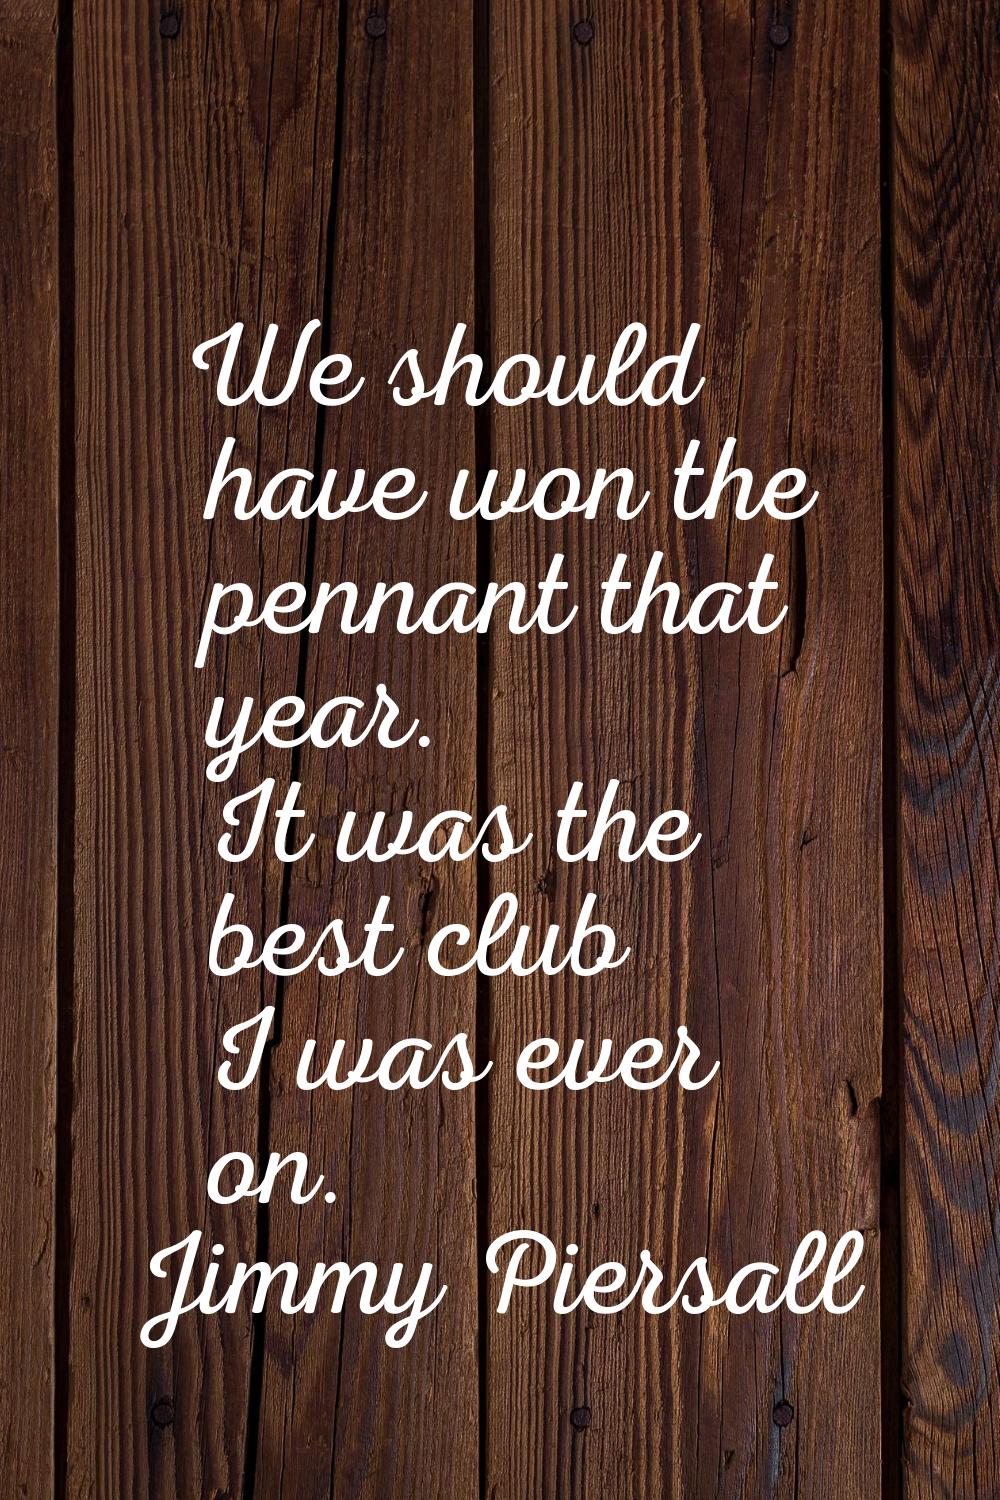 We should have won the pennant that year. It was the best club I was ever on.